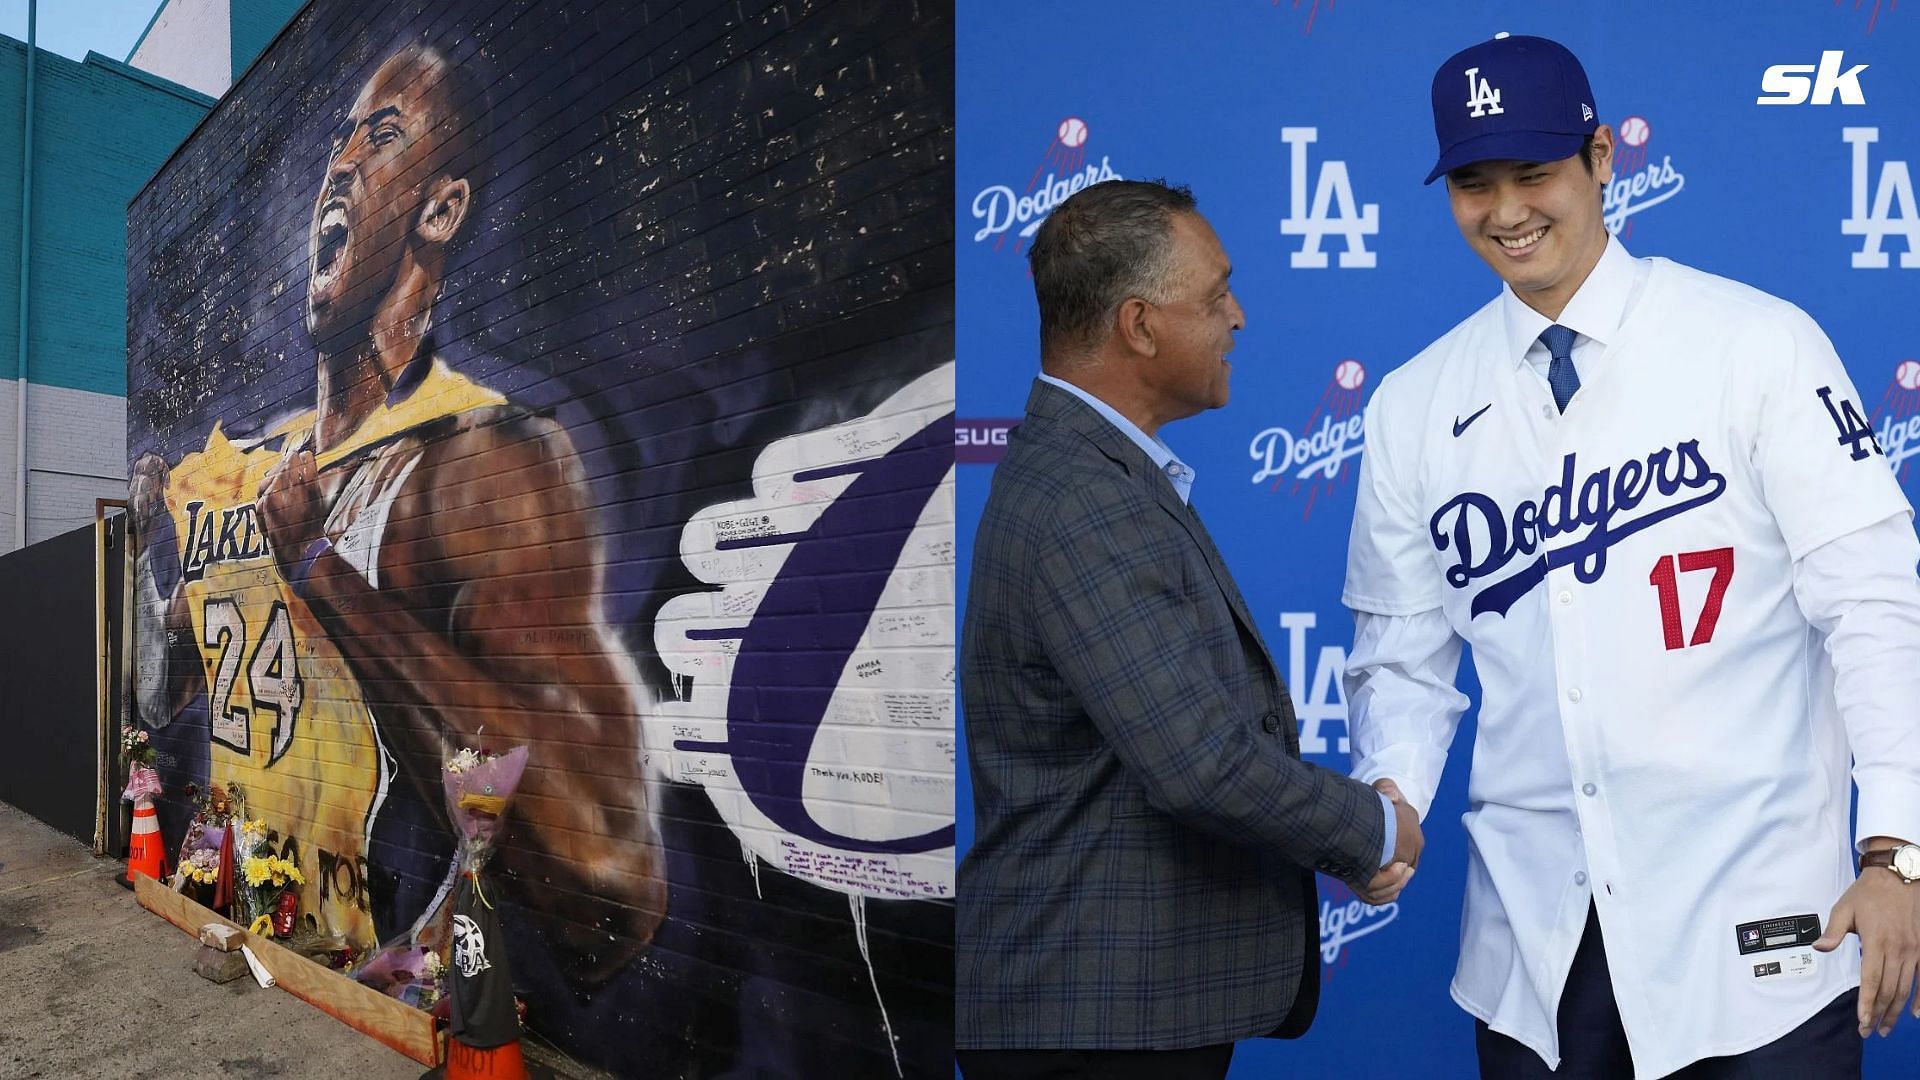 &quot;It was a strong and touching message&quot; - Shohei Ohtani discloses moving note from NBA legend Kobe Bryant that influenced $700,000,000 Dodgers move